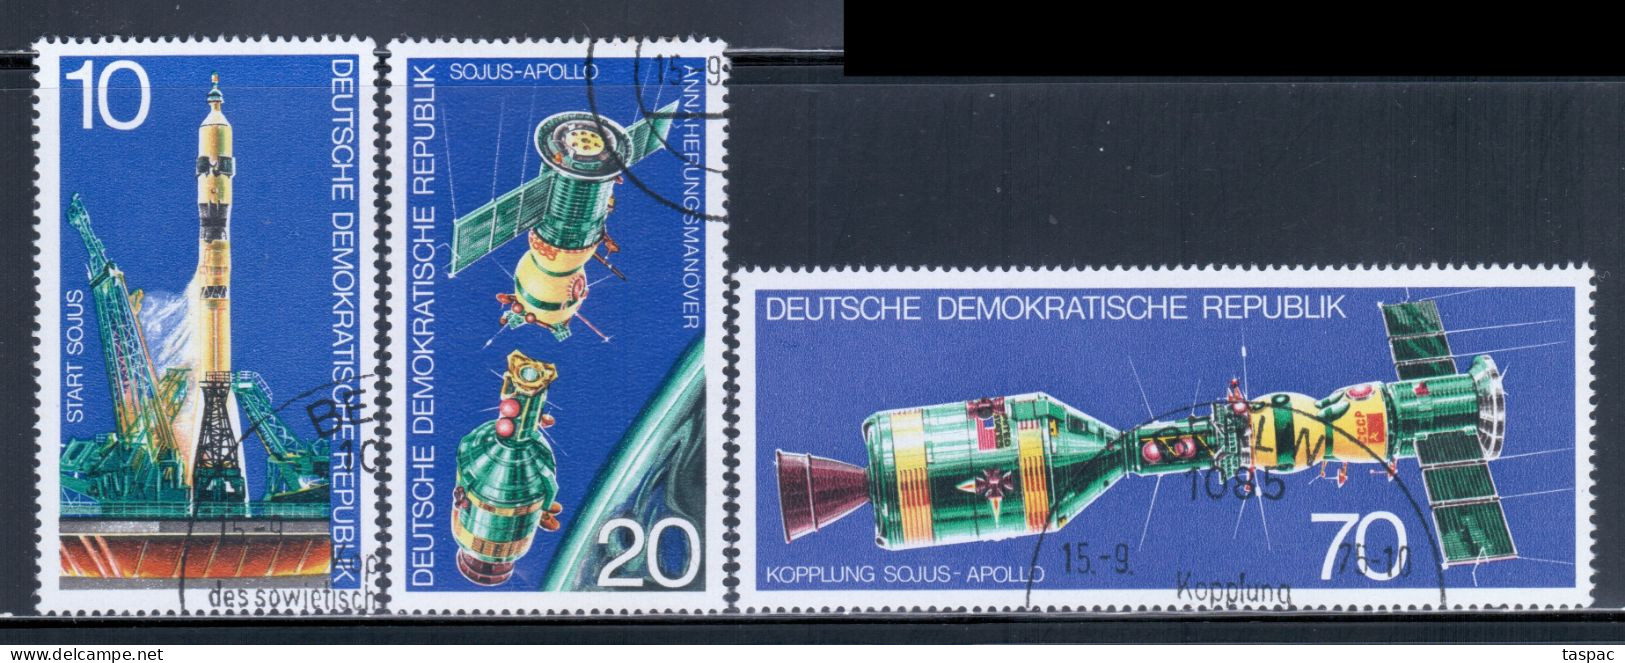 East Germany / DDR 1975 Mi# 2083-2085 Used - Apollo Soyuz Space Test Project - Europe